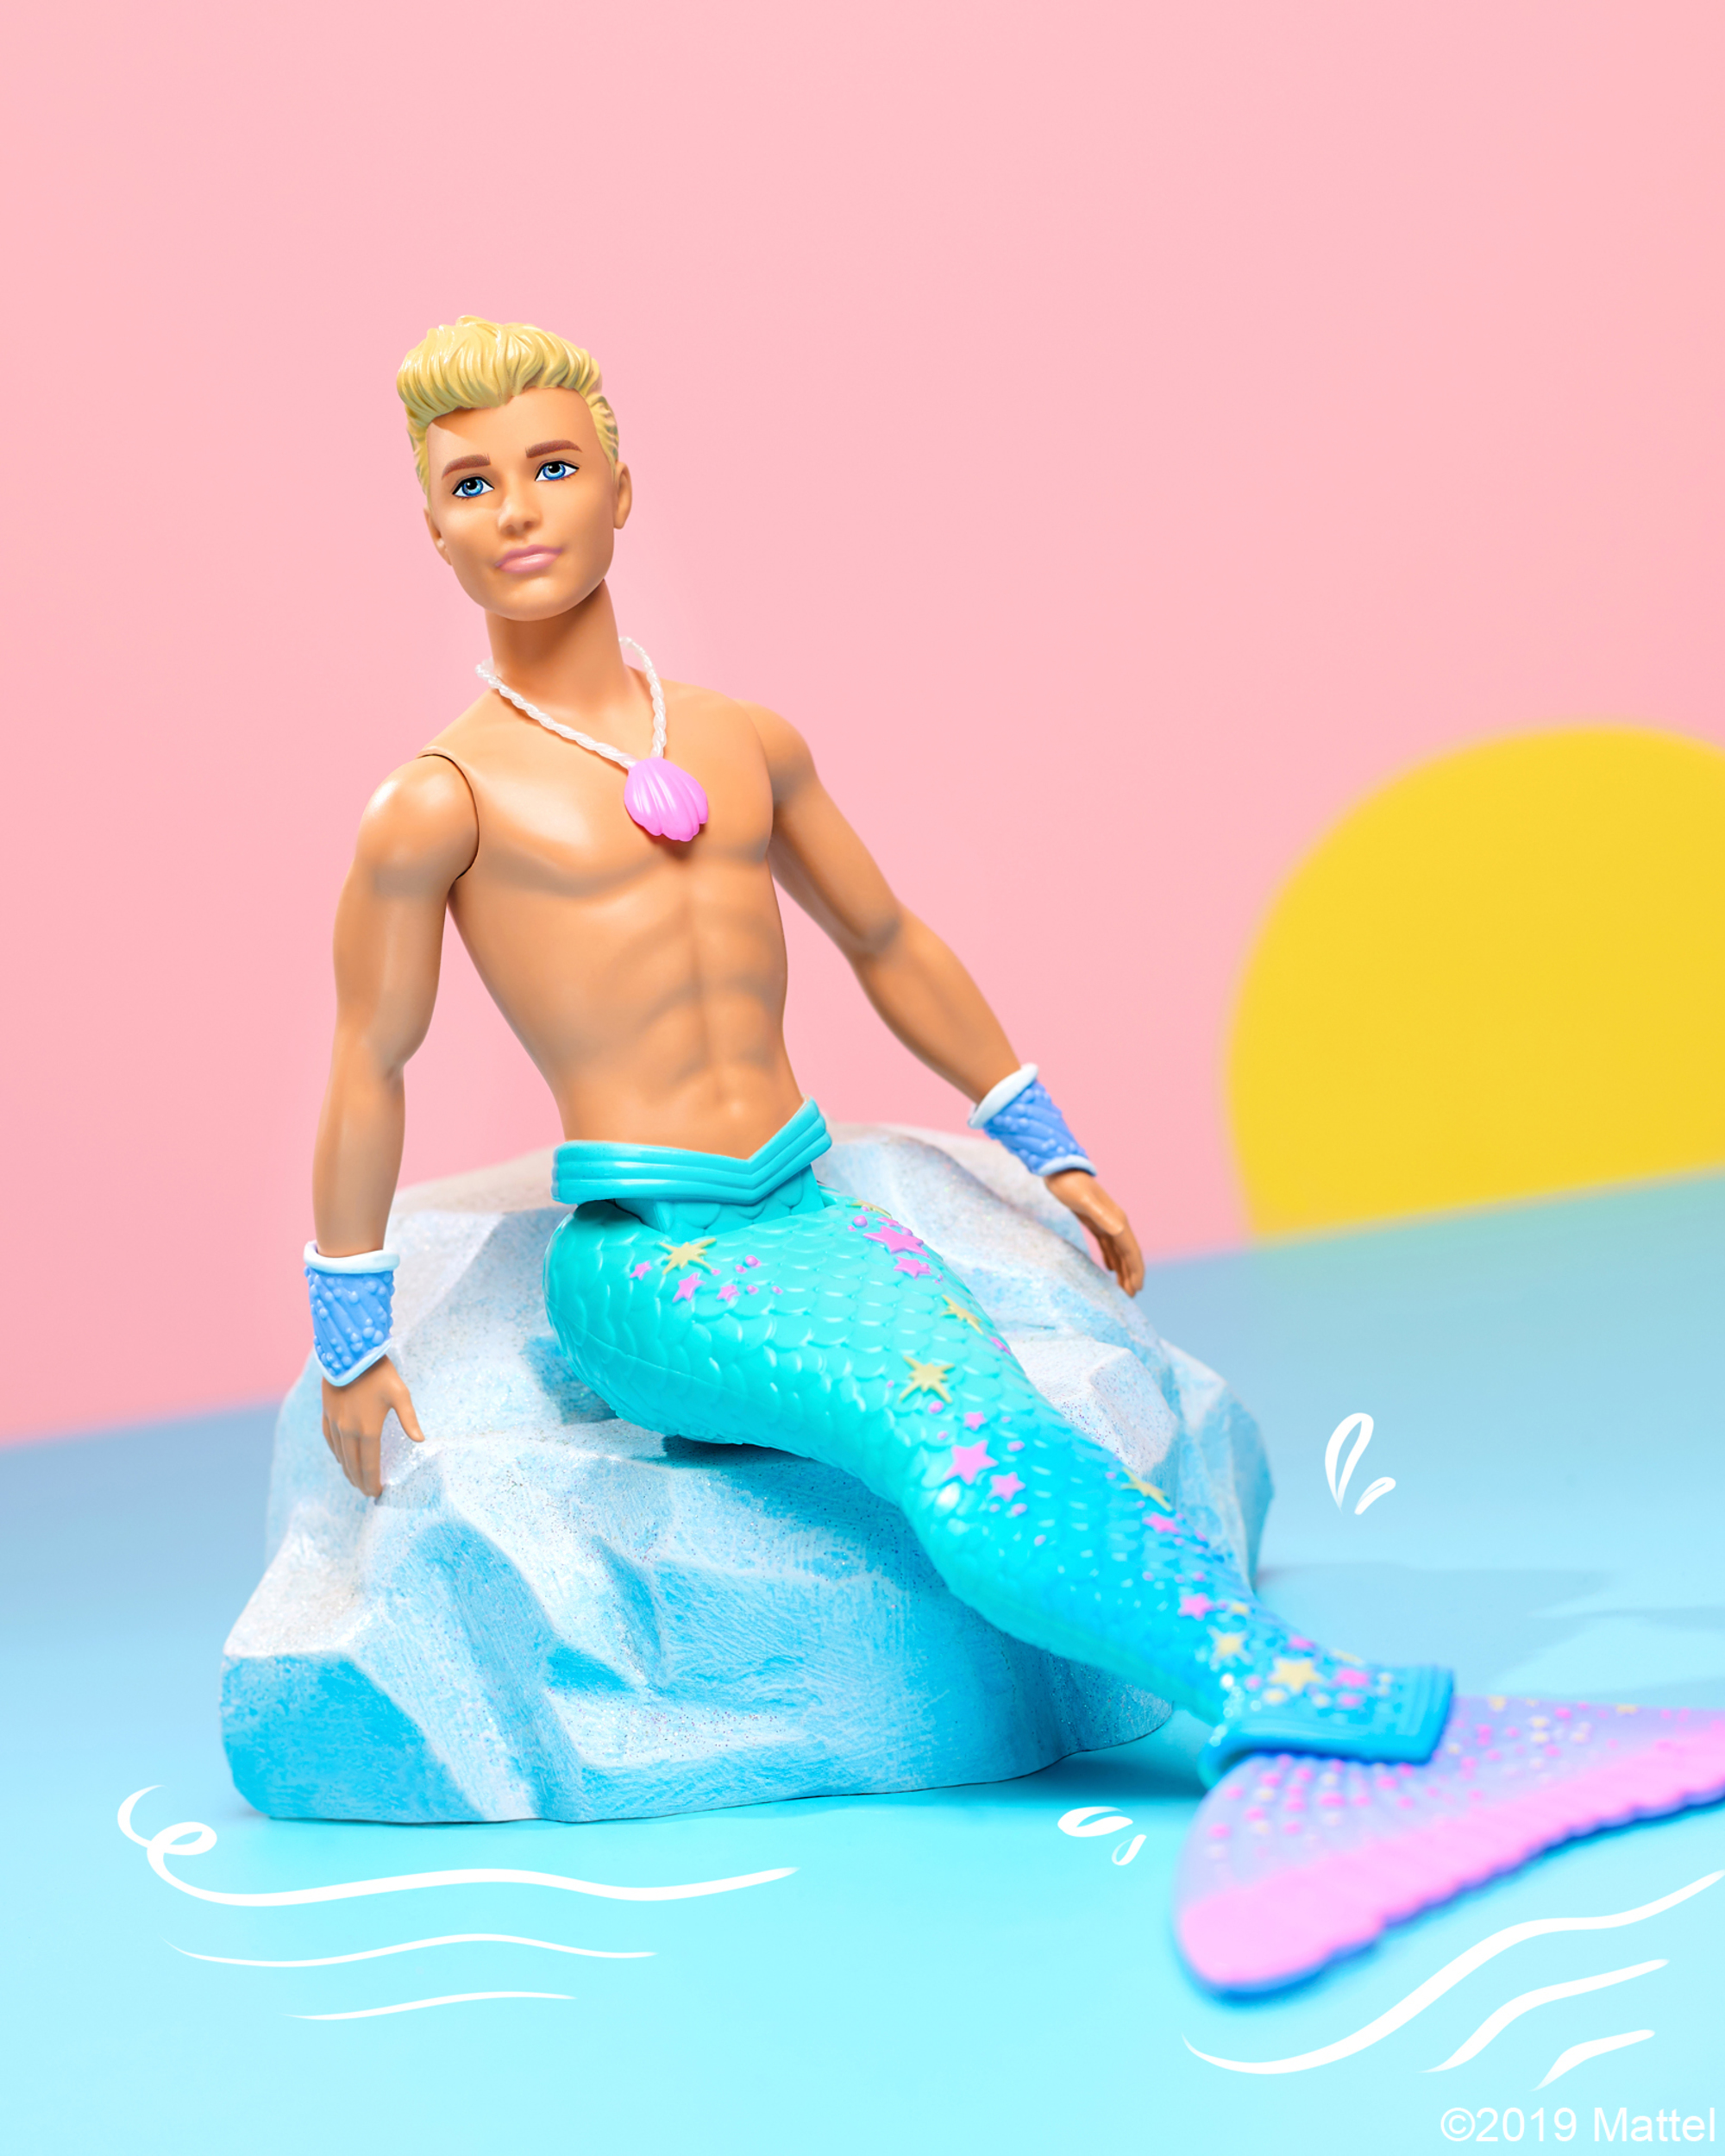 Barbie Dreamtopia Merman Doll, Blonde with Pink Seashell Necklace - image 2 of 6